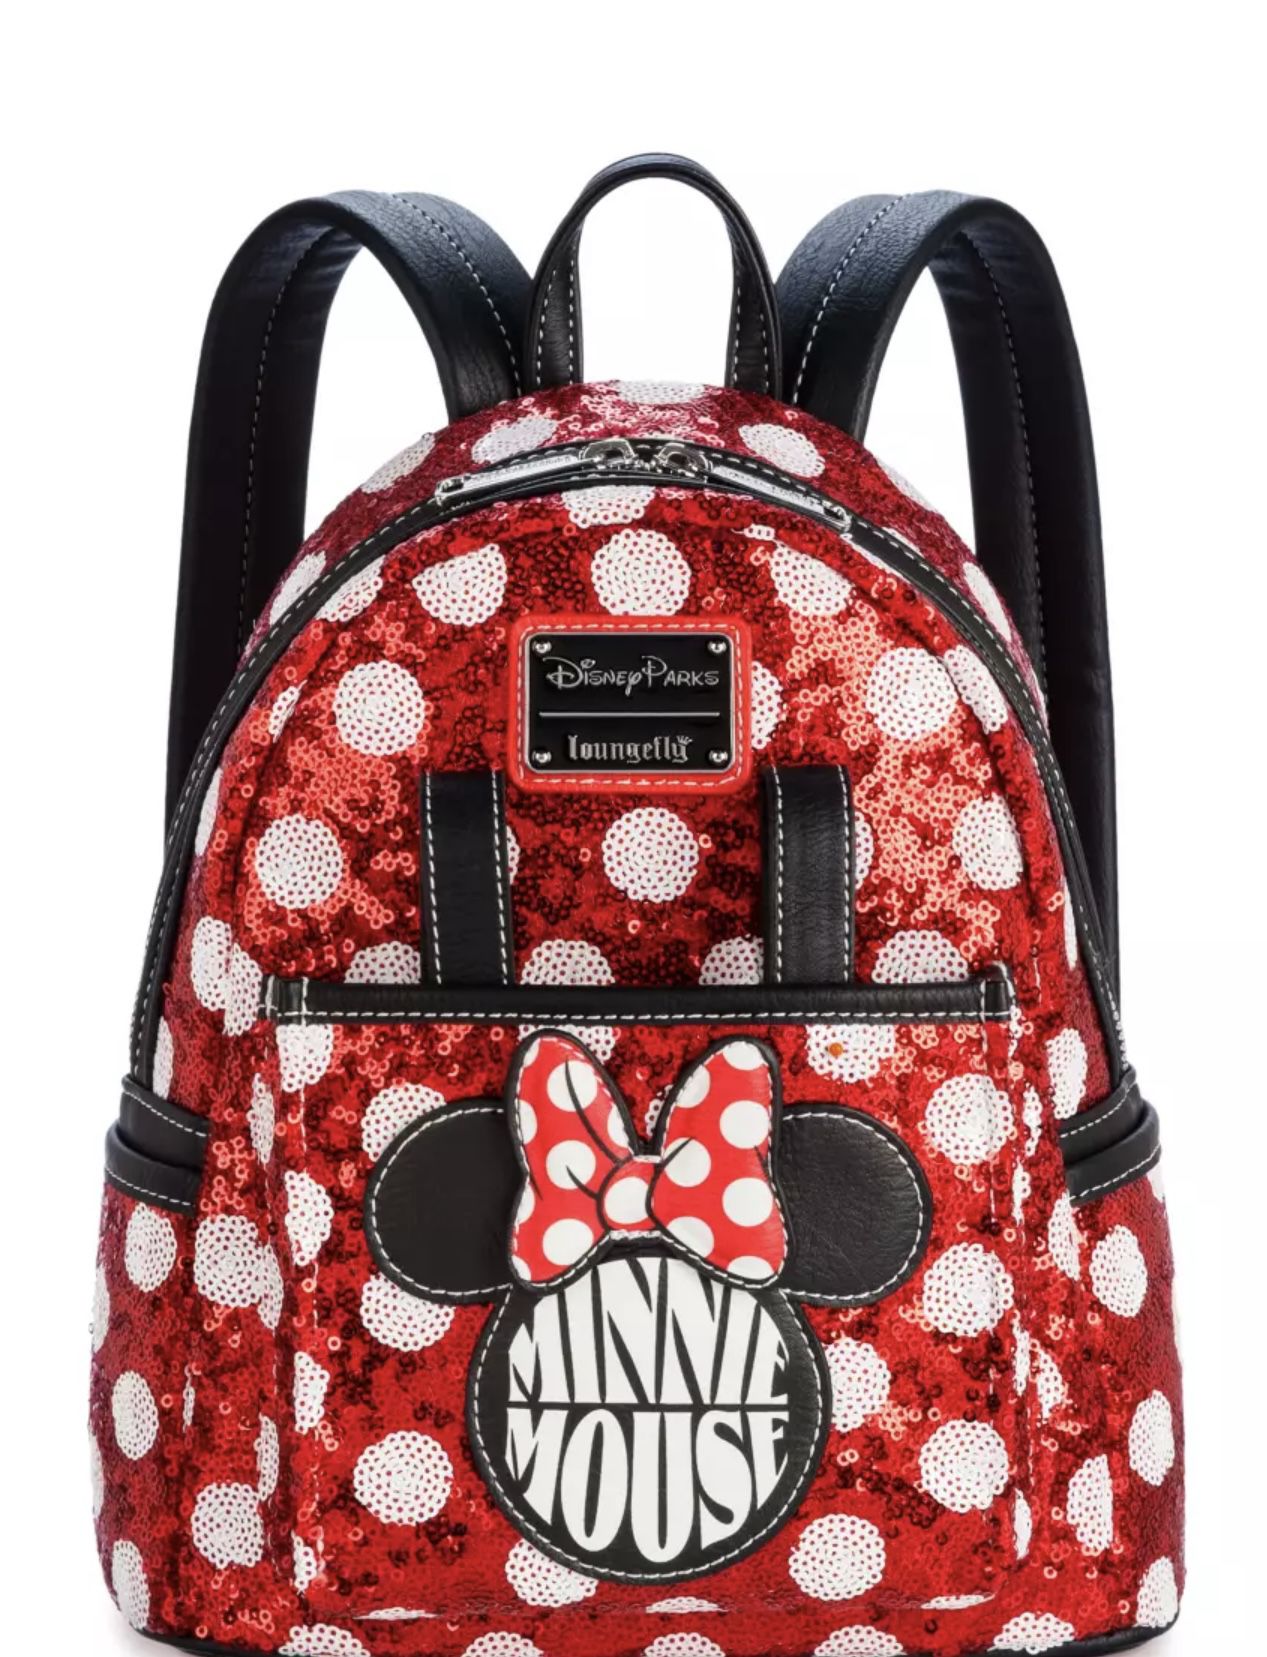 Minnie Mouse Sequin Polka Dot Backpack